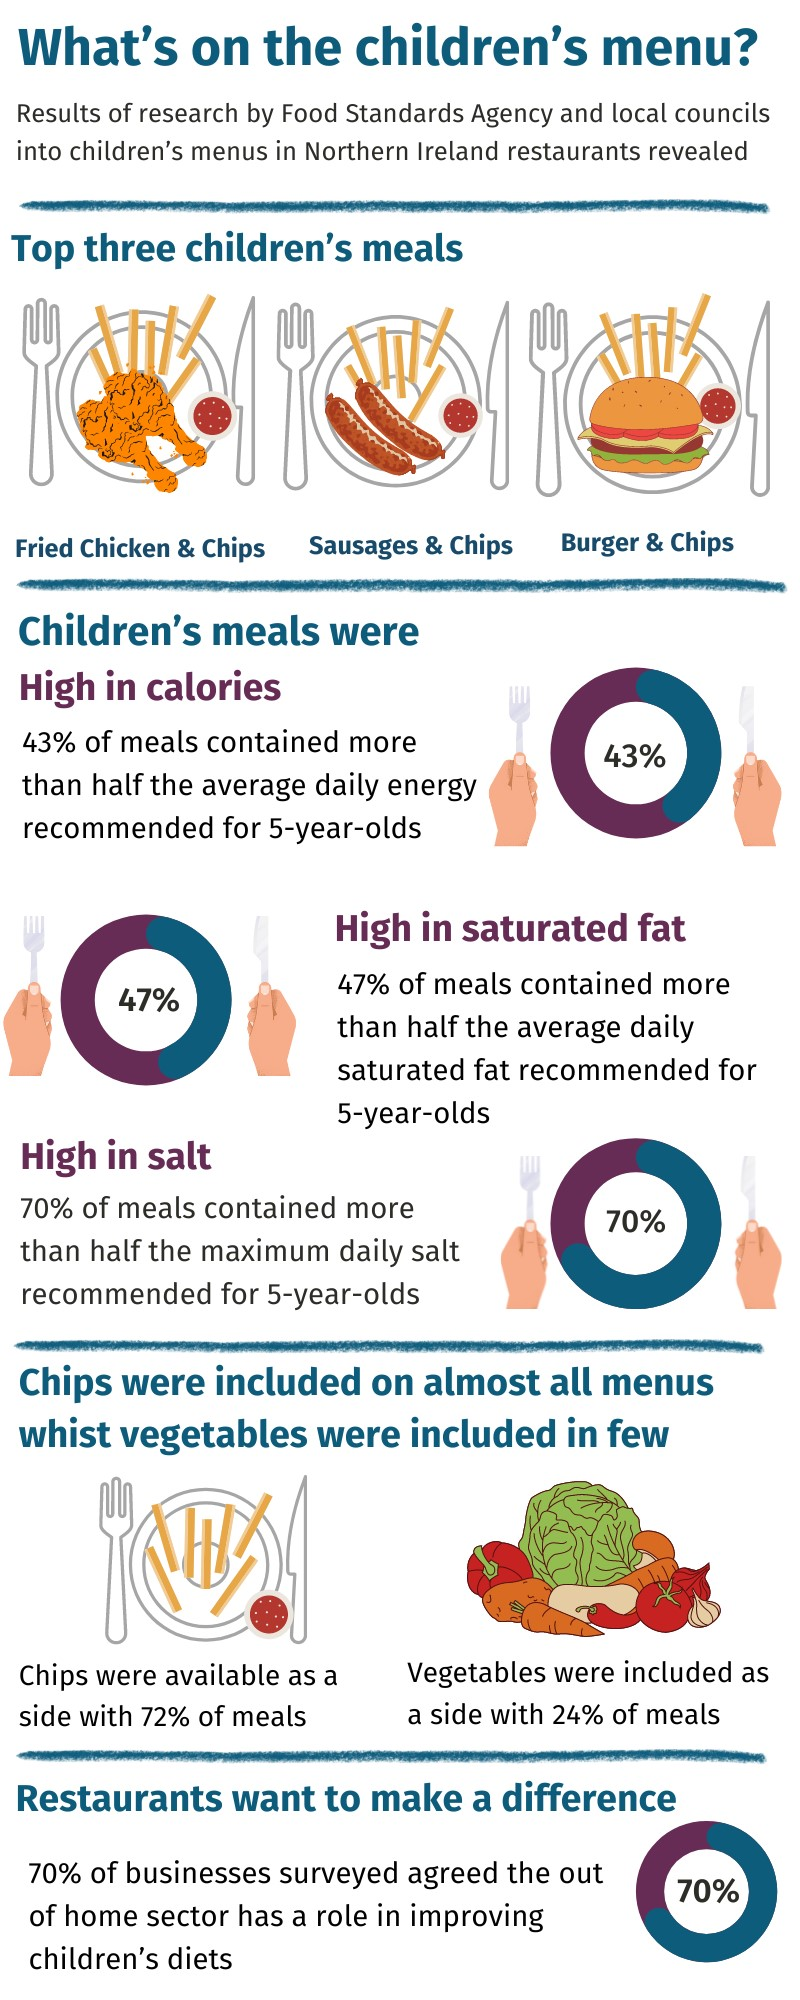 The report found choice was limited on children’s menus and few healthy options were available.